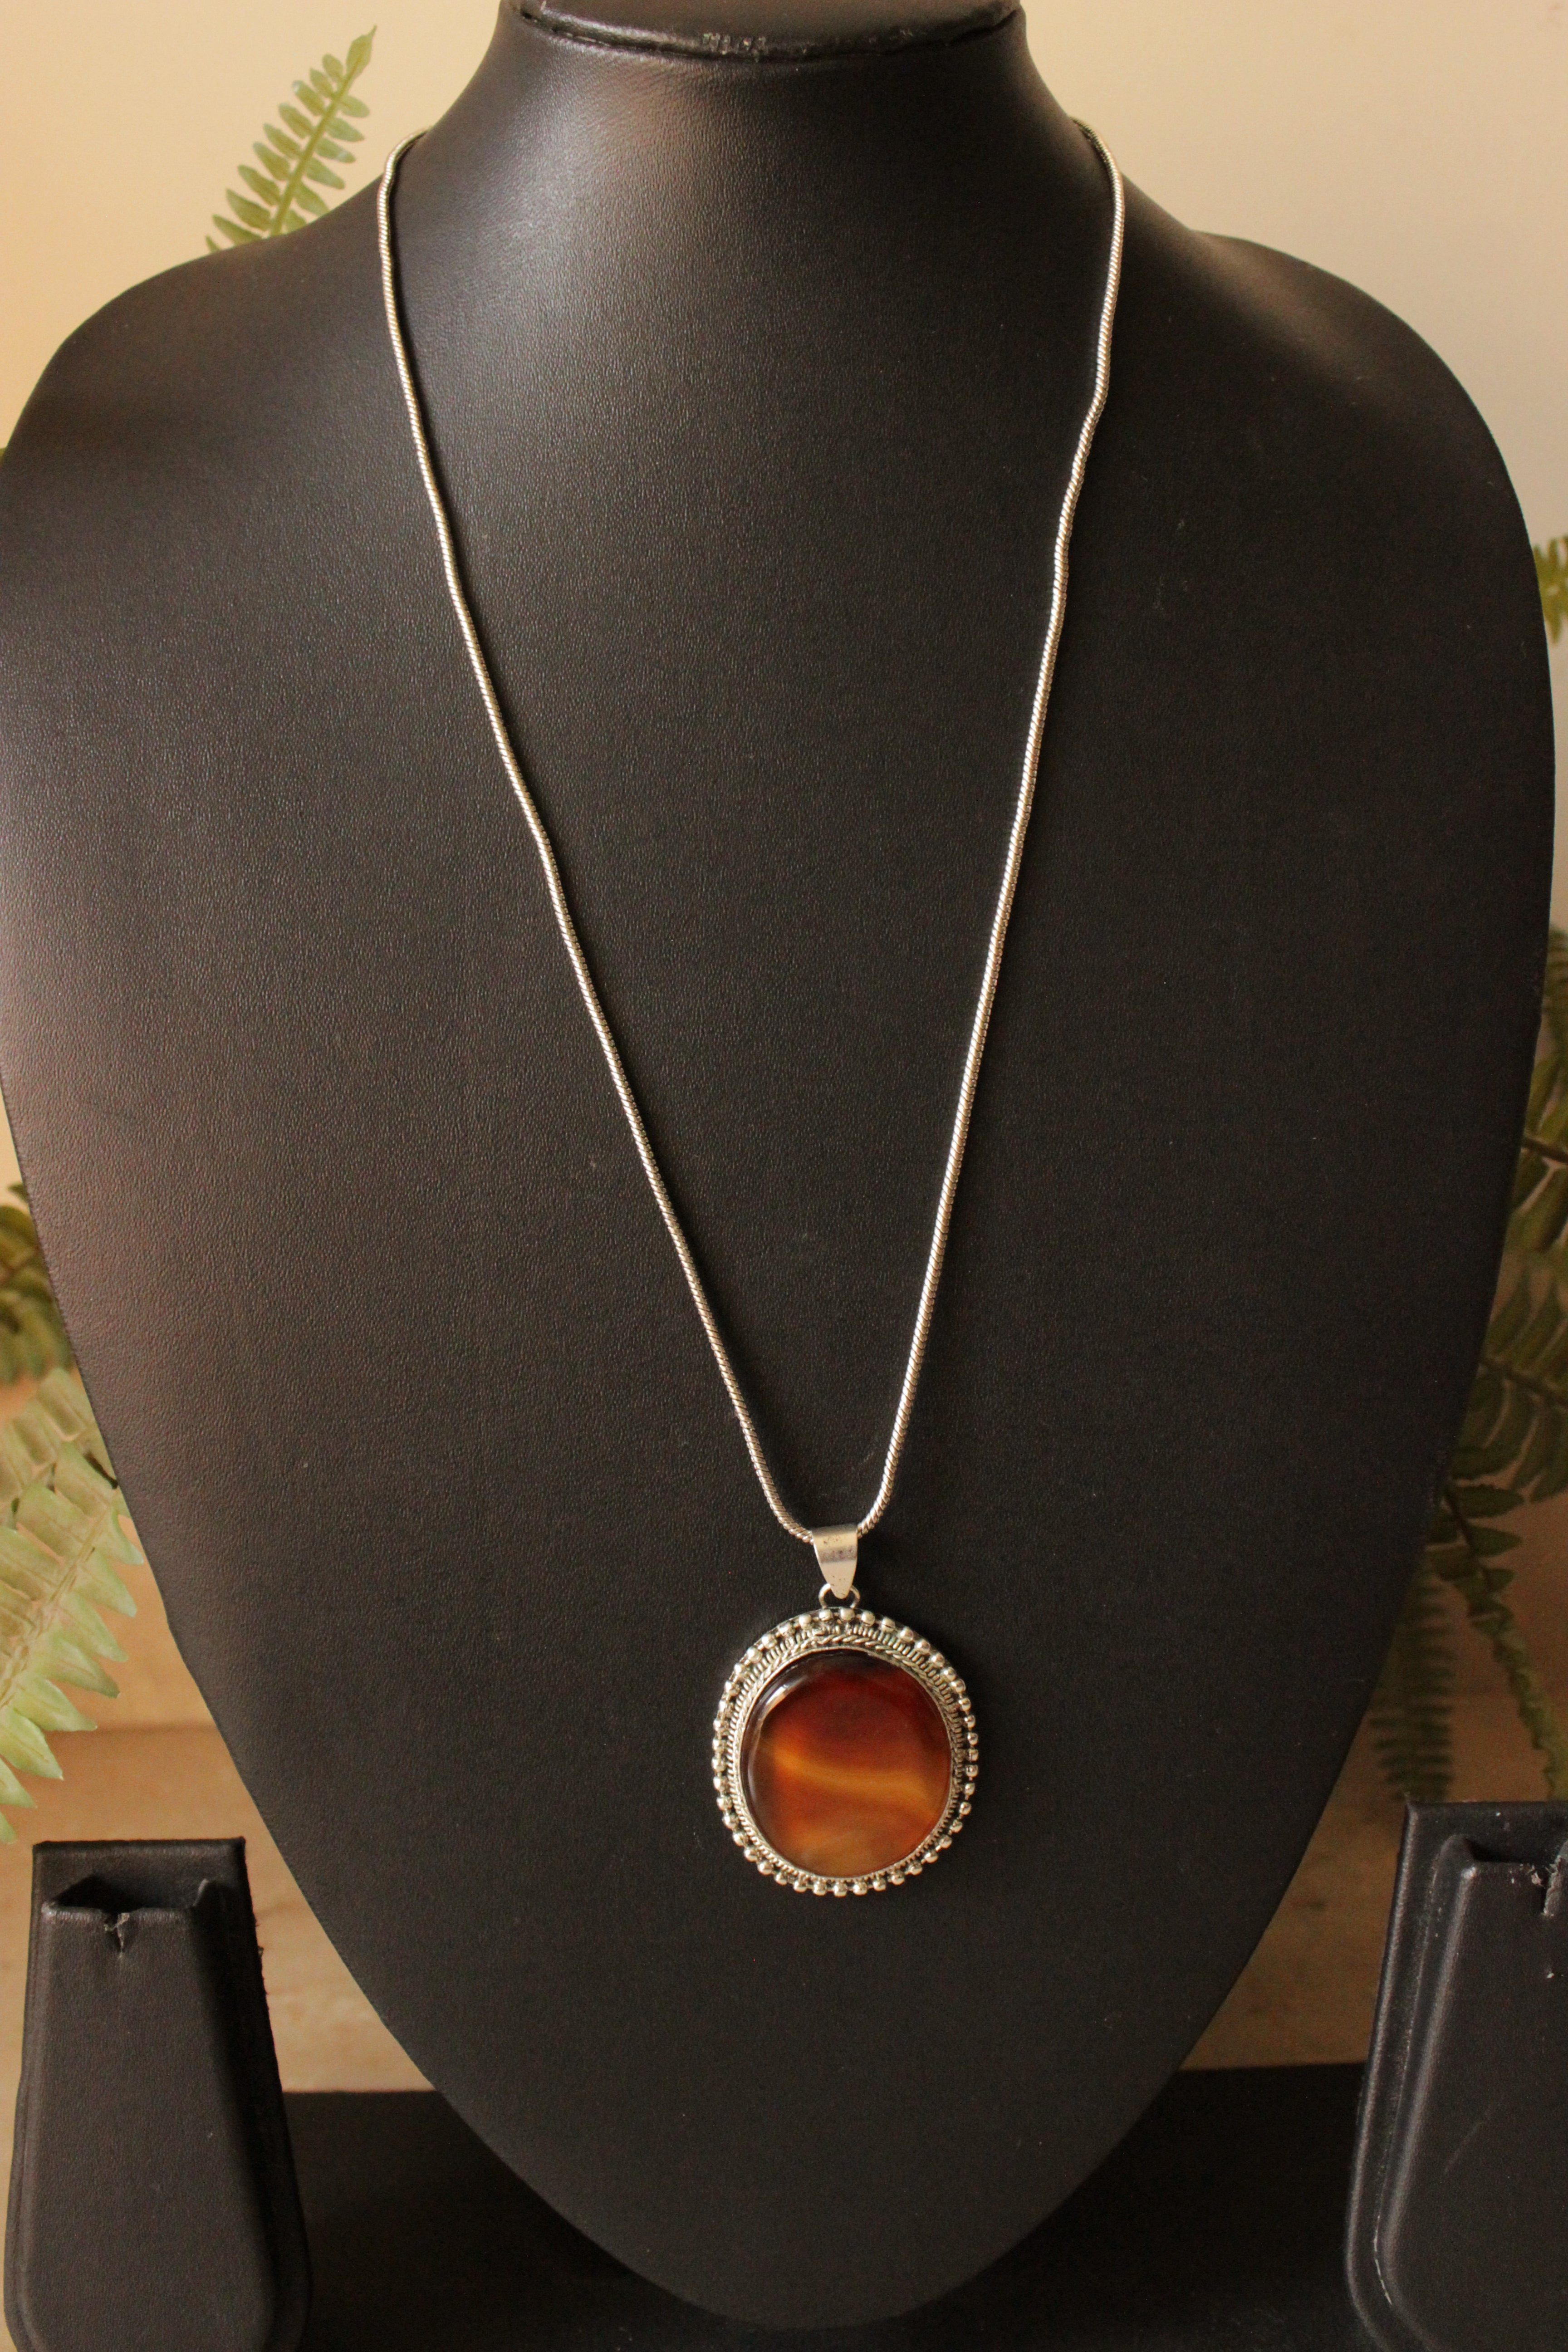 Shades of Brown Natural Gemstone Embedded Silver Finish Chain Necklace